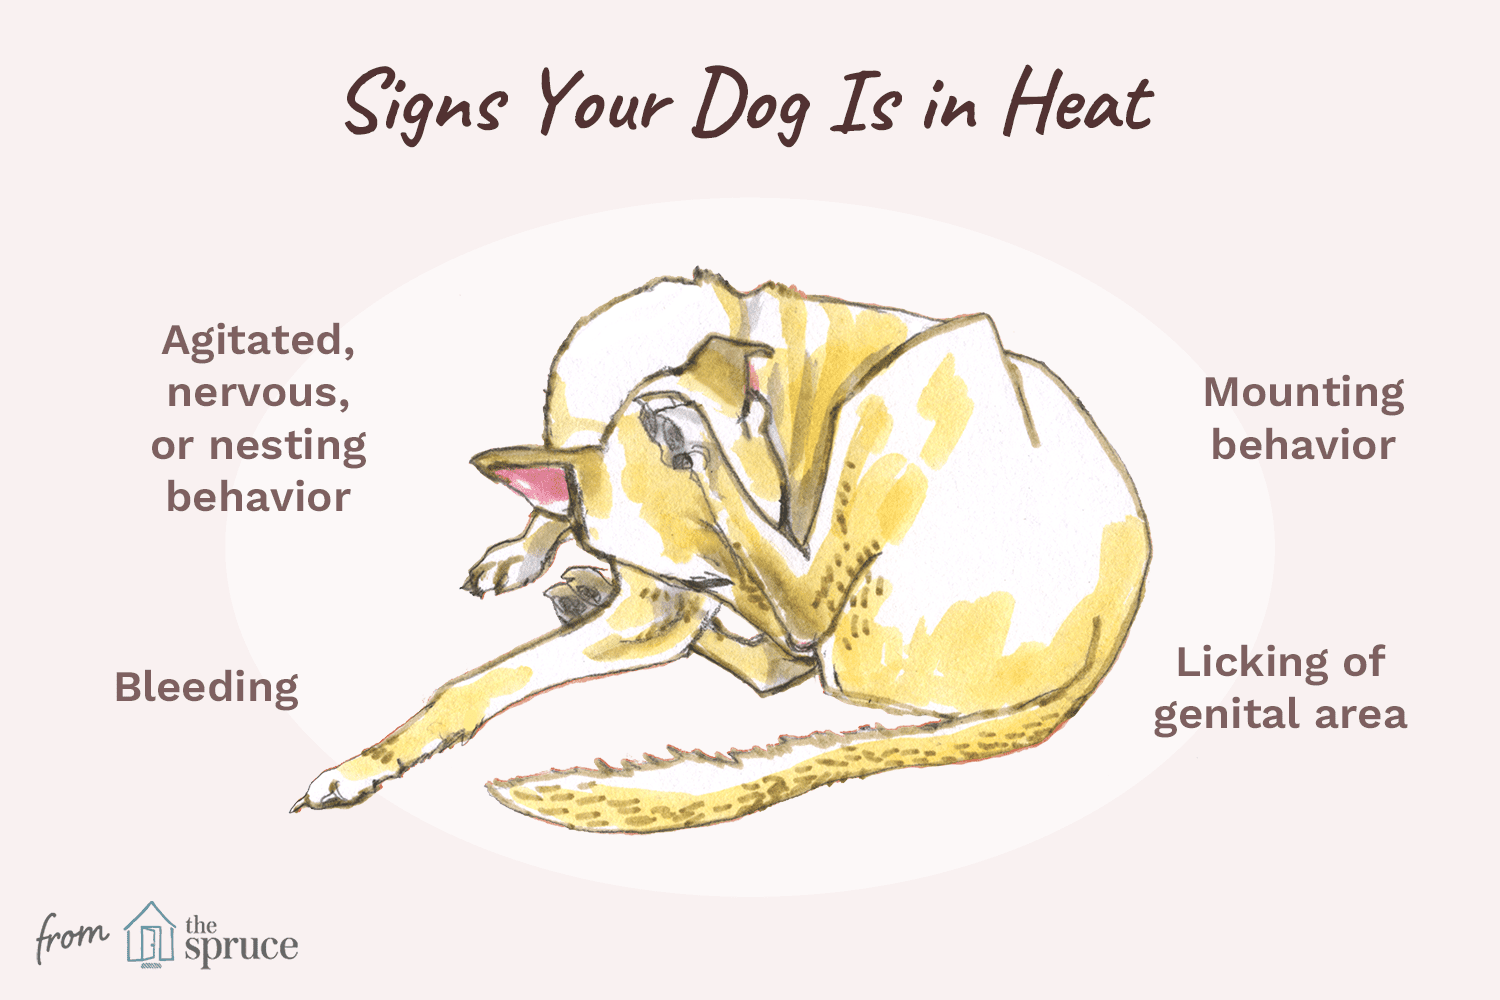 illustration of signs your dog is in heat